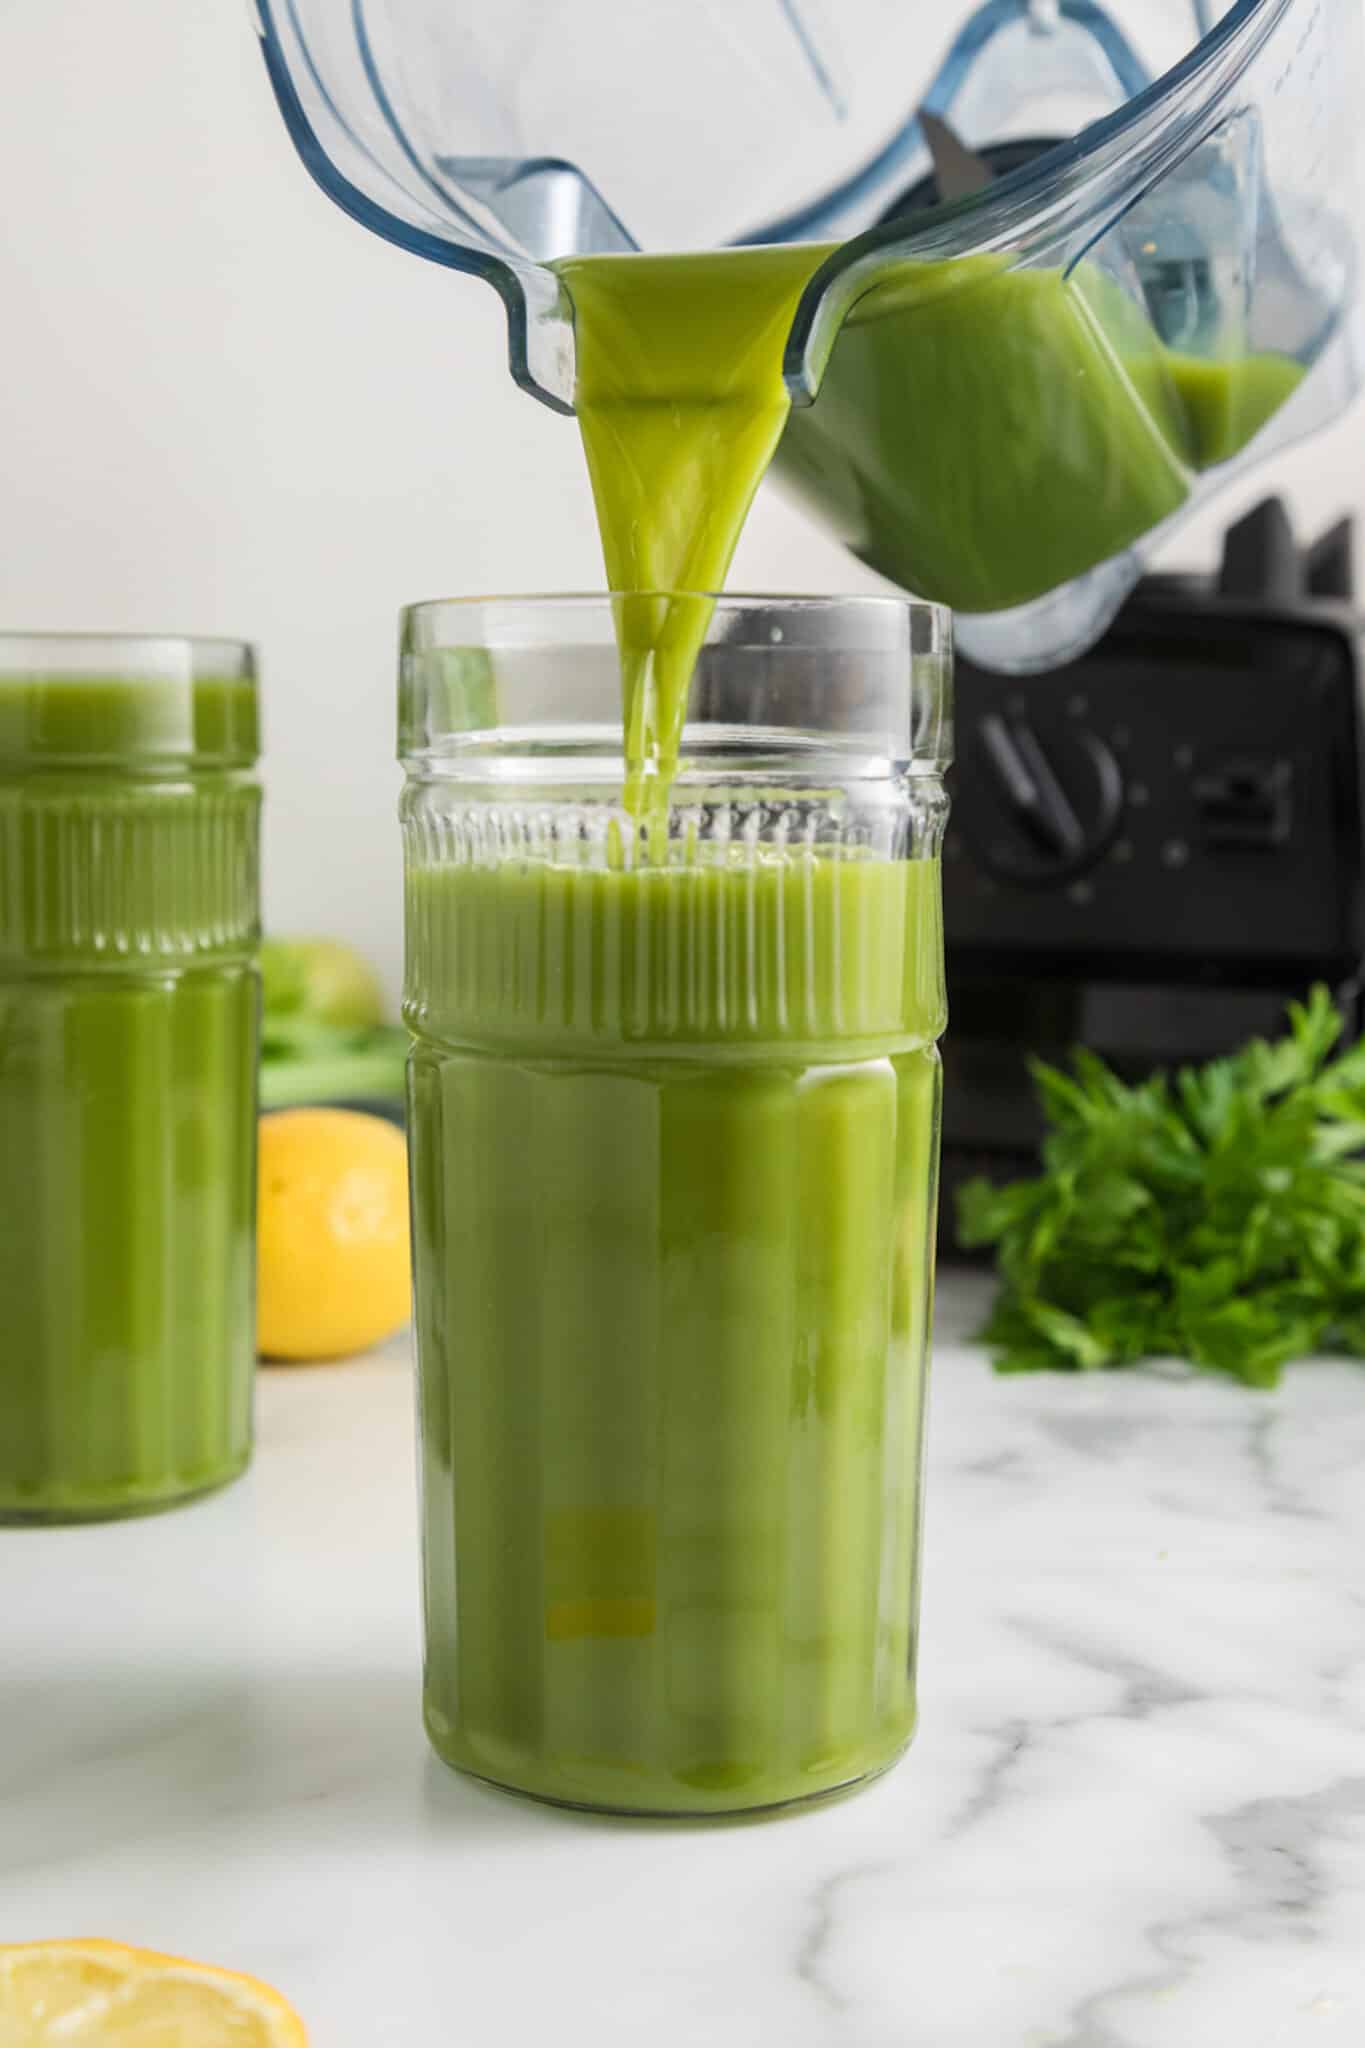 pouring green juice recipe from blender into a tall glass.